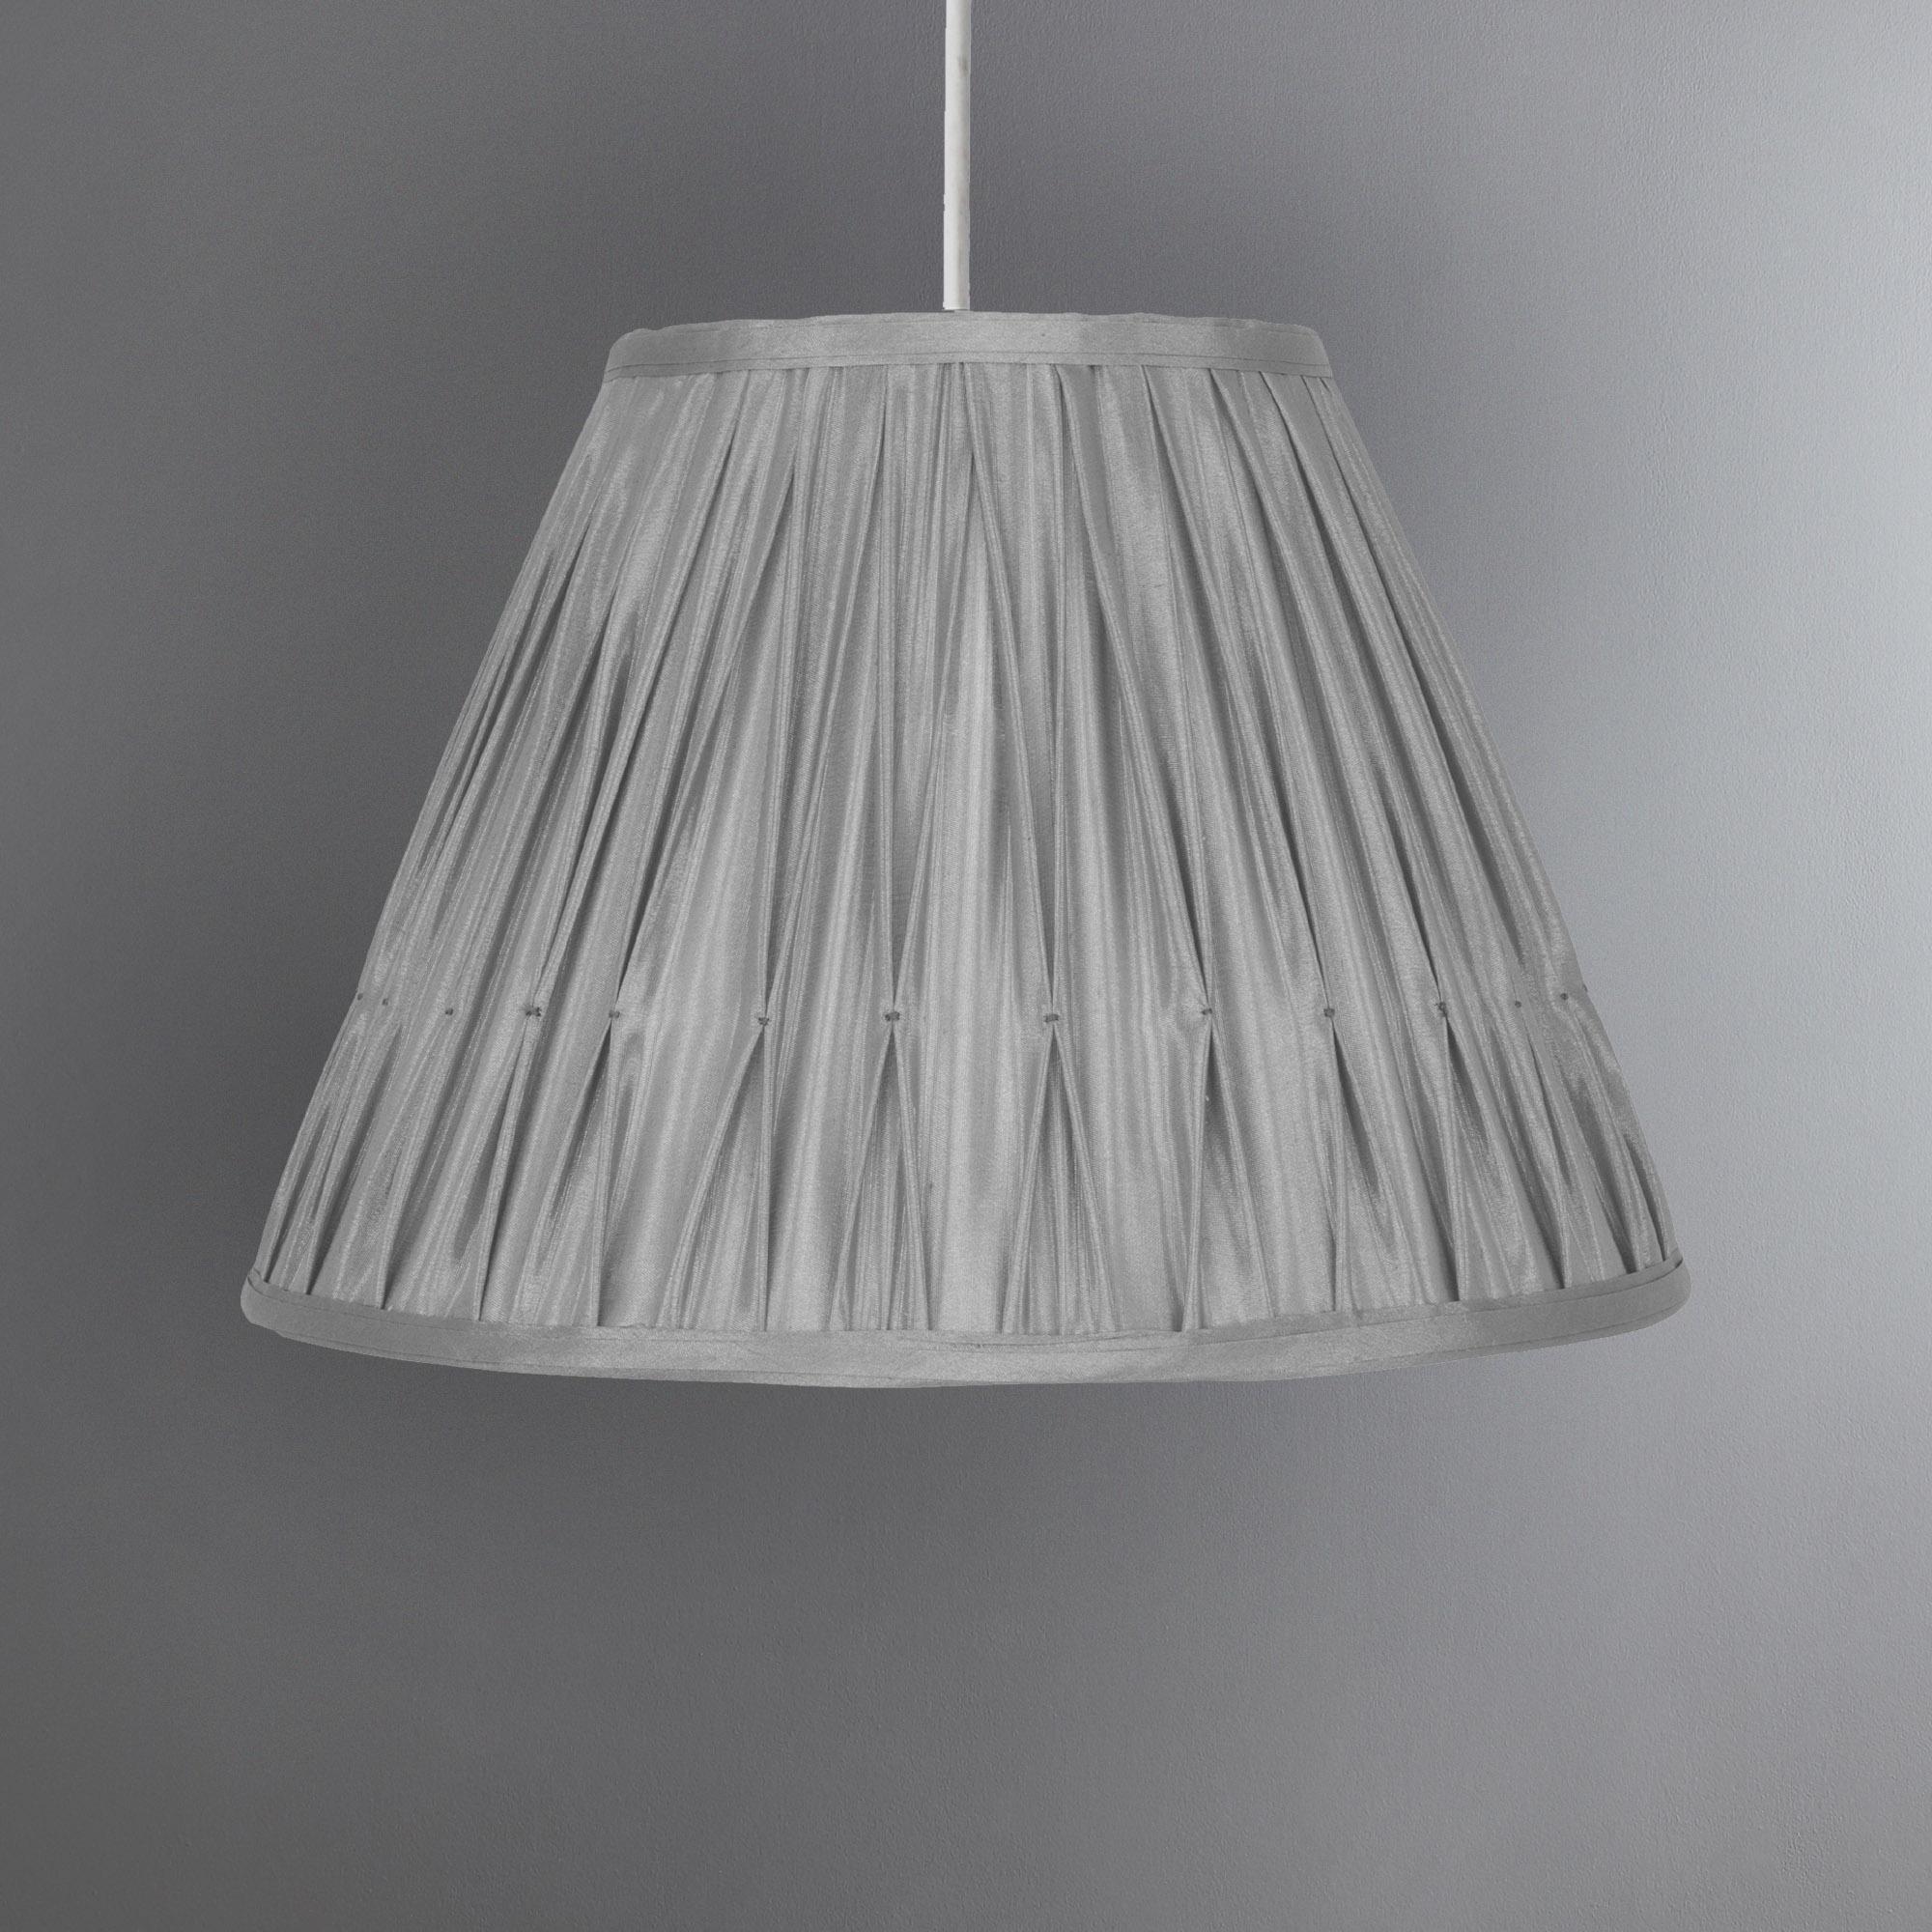 Valerie Pleat Candle Lamp Shade Grey